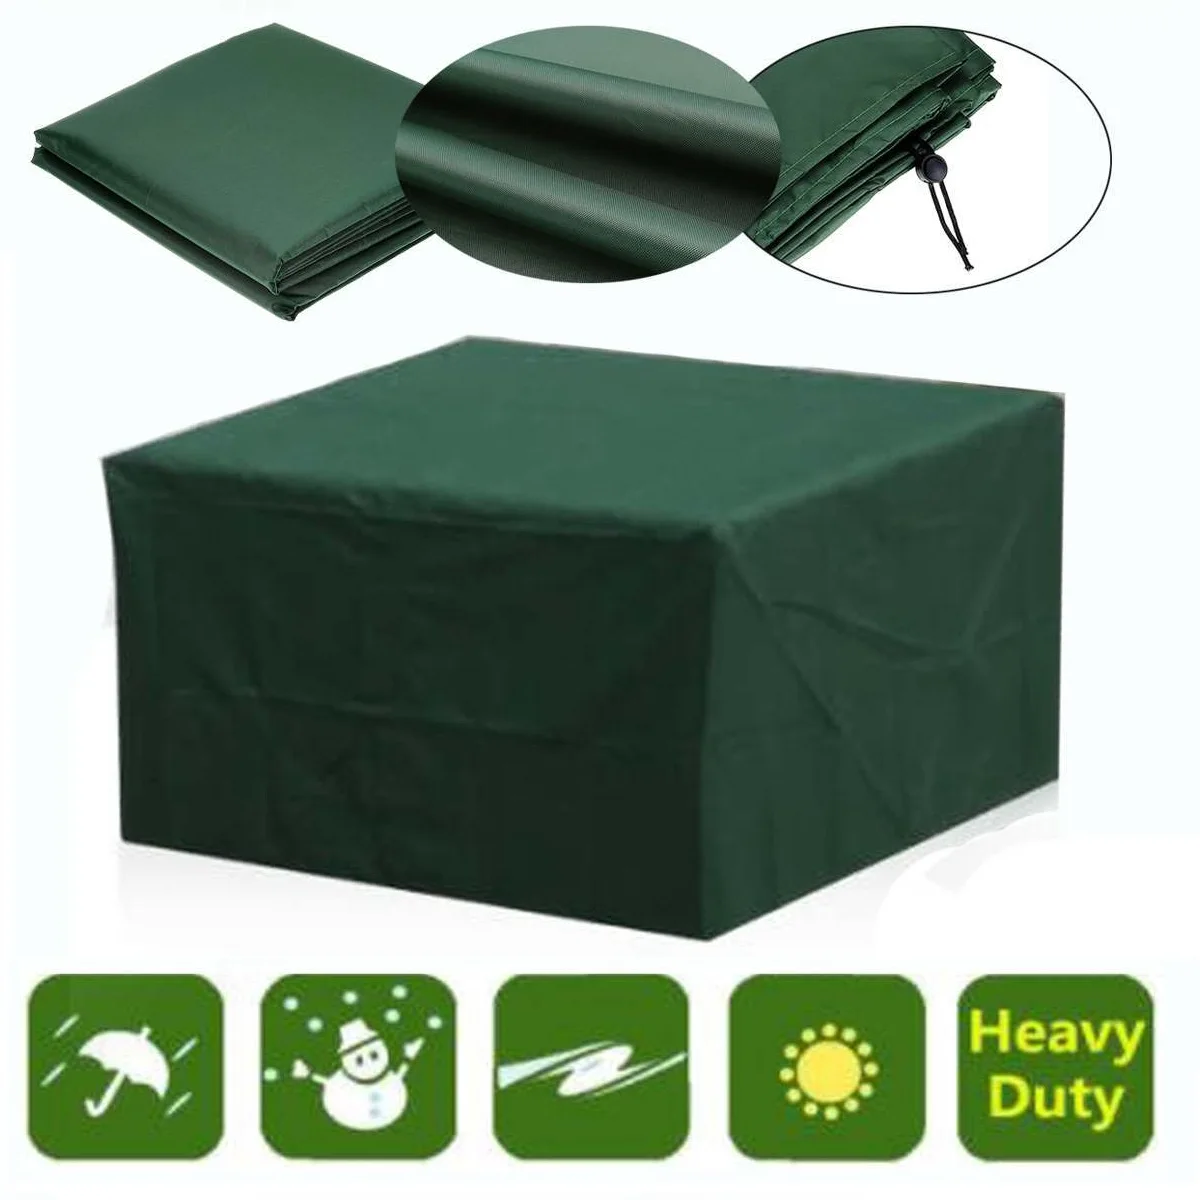 

Waterproof Furniture Covers Outdoor Patio Garden Decoration Rain Snow Chair Covers for Dust Proof Cover 210 D Green